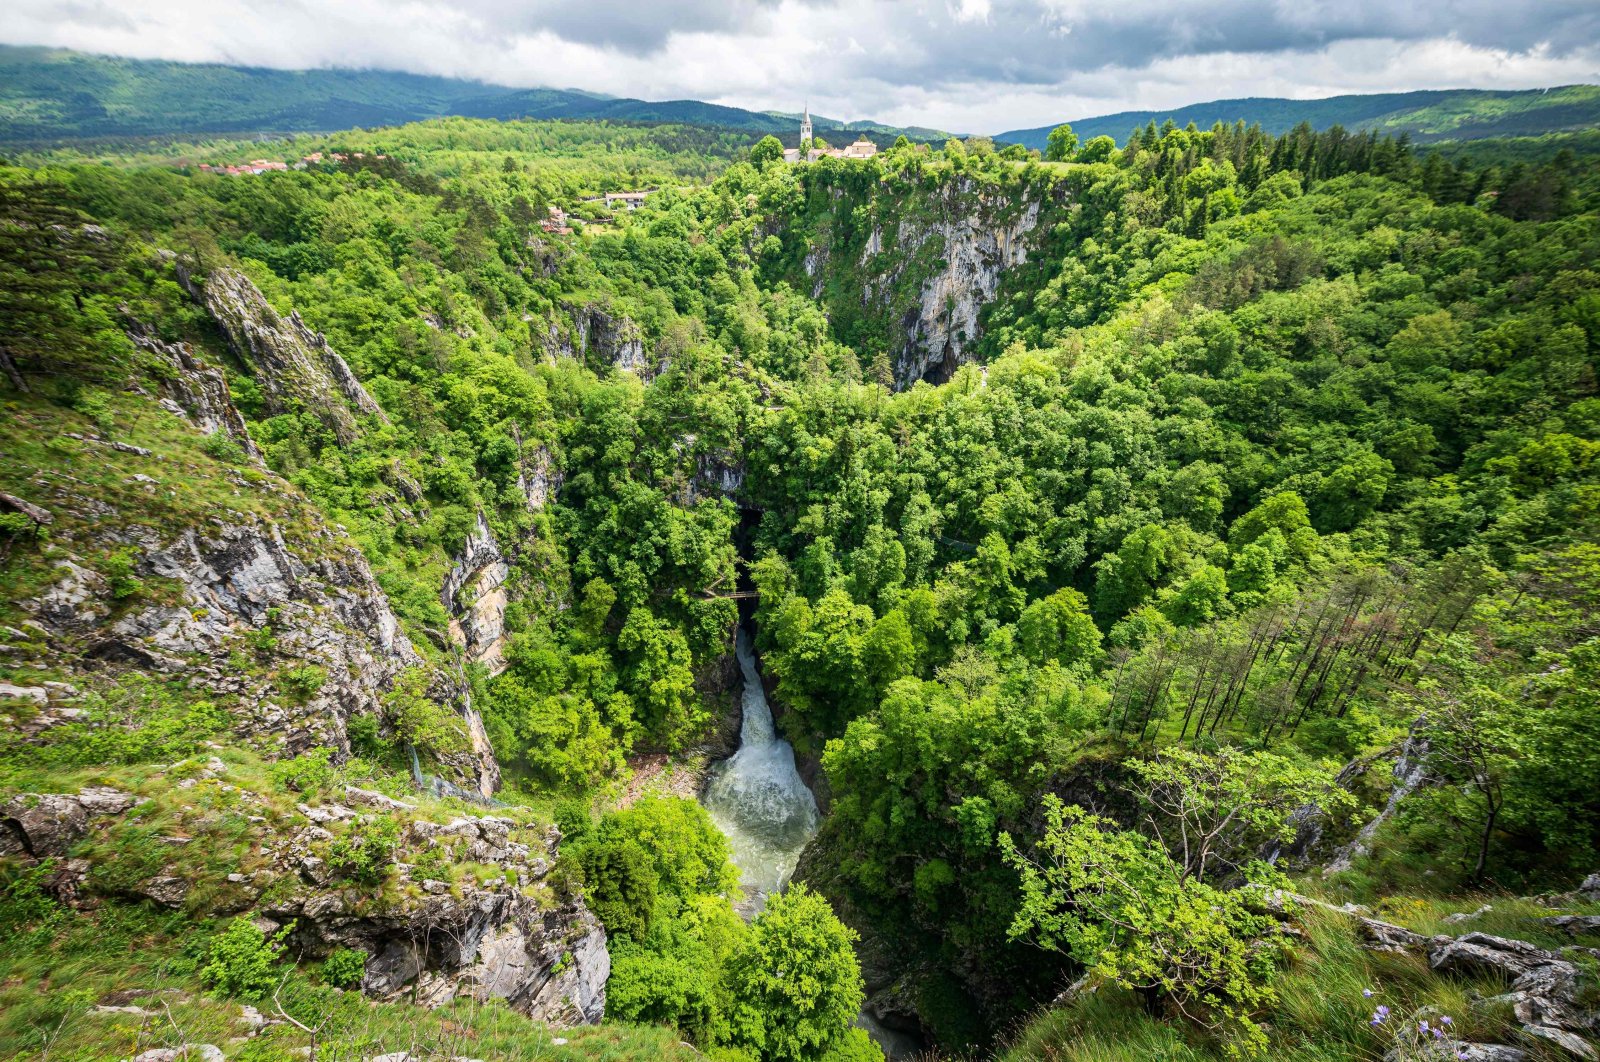 A part of the Skocjan Caves can be seen near the town of Divaca, Slovenia, May 25, 2021. (AFP Photo)